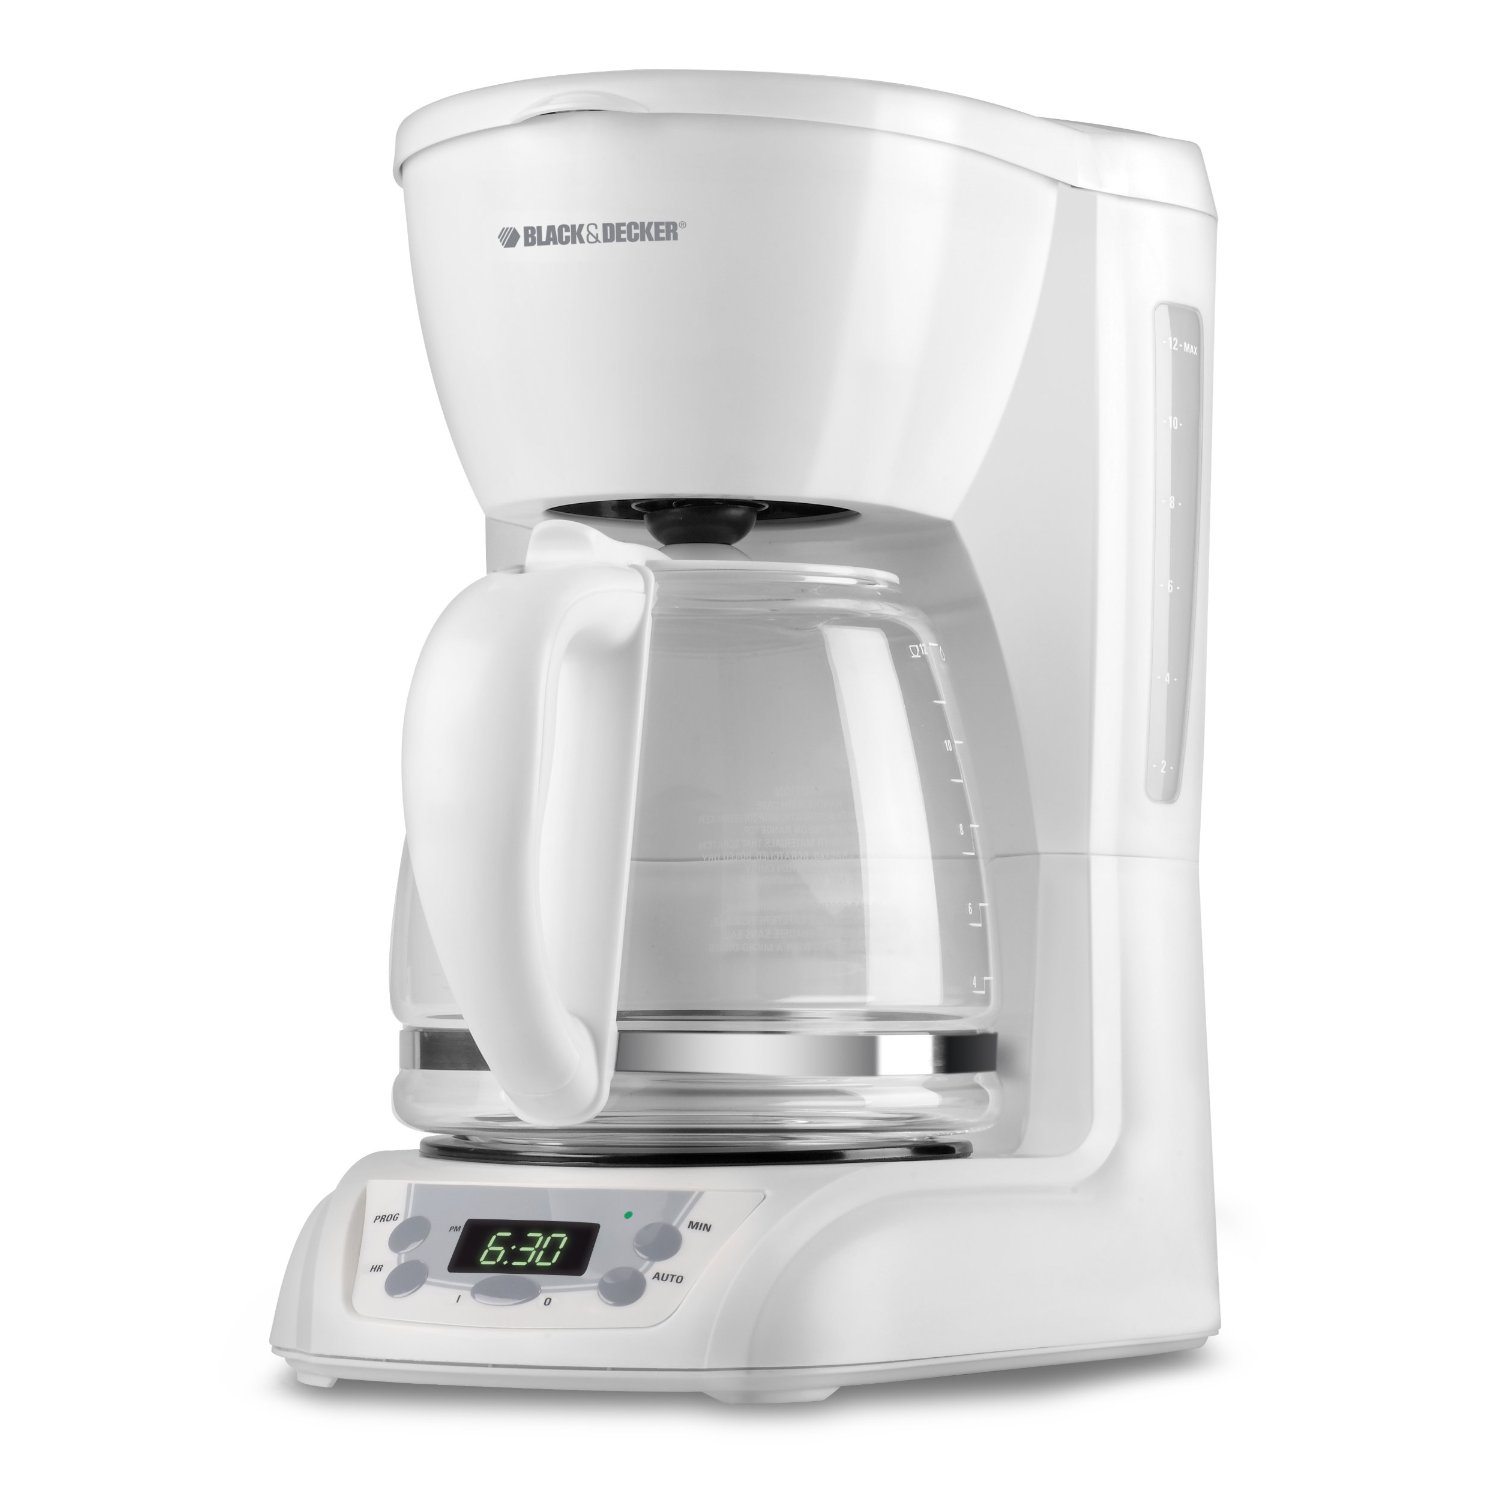 Black & Decker DLX1050 12-Cup Programmable Coffeemaker with Glass Carafe$14.88